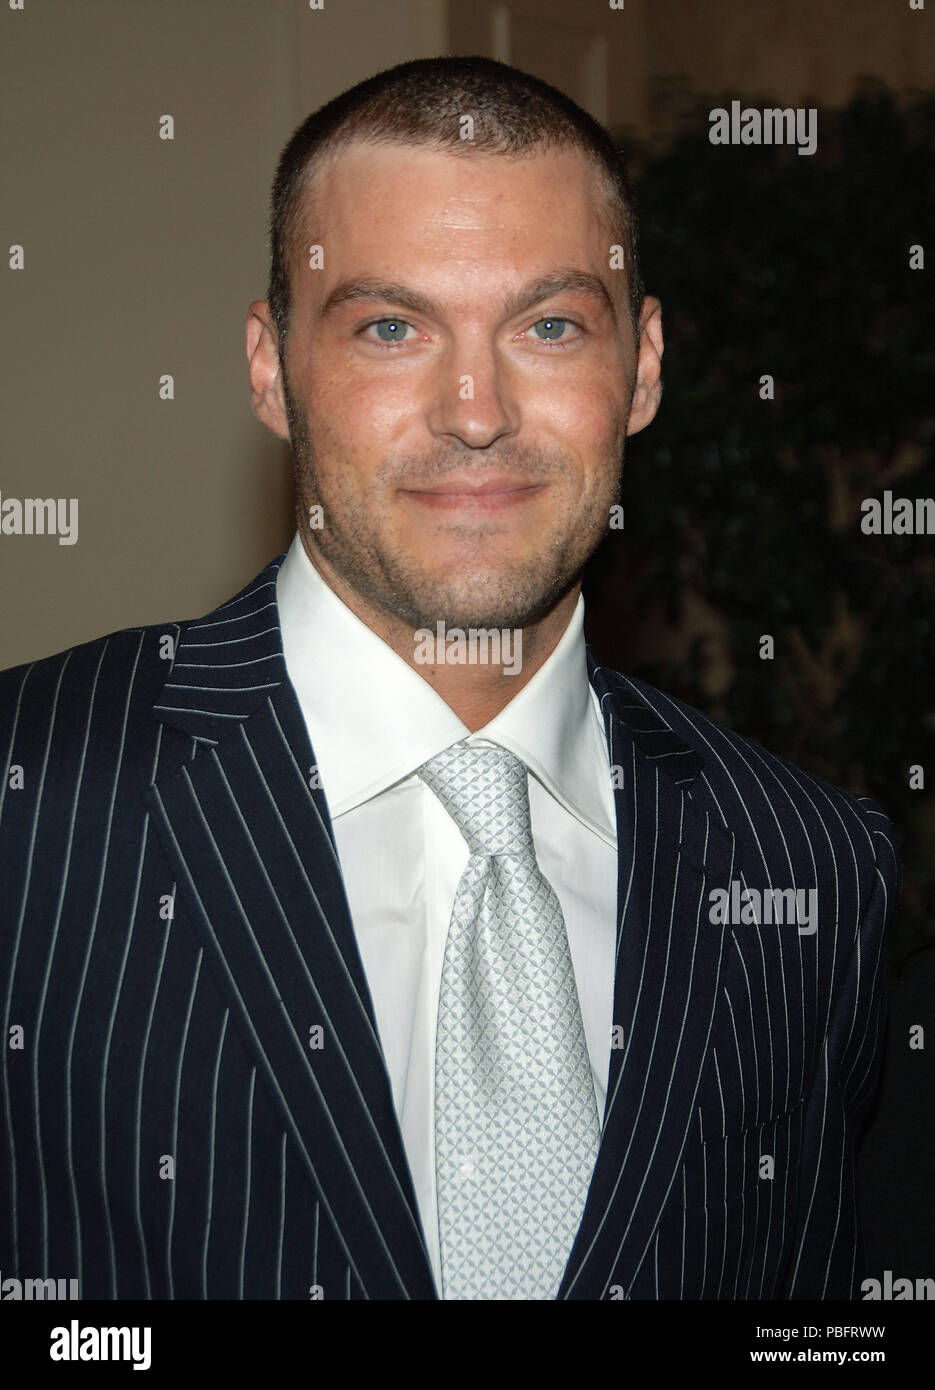 Brian Austin Green arriving at the Beverly Hills 90210 and Melrose Place DVD Release Party at the Beverly Hilton in Los Angeles.  headshot eye contact  20 GreenBrianAustin 020 Red Carpet Event, Vertical, USA, Film Industry, Celebrities,  Photography, Bestof, Arts Culture and Entertainment, Topix Celebrities fashion /  Vertical, Best of, Event in Hollywood Life - California,  Red Carpet and backstage, USA, Film Industry, Celebrities,  movie celebrities, TV celebrities, Music celebrities, Photography, Bestof, Arts Culture and Entertainment,  Topix, headshot, vertical, one person,, from the year  Stock Photo